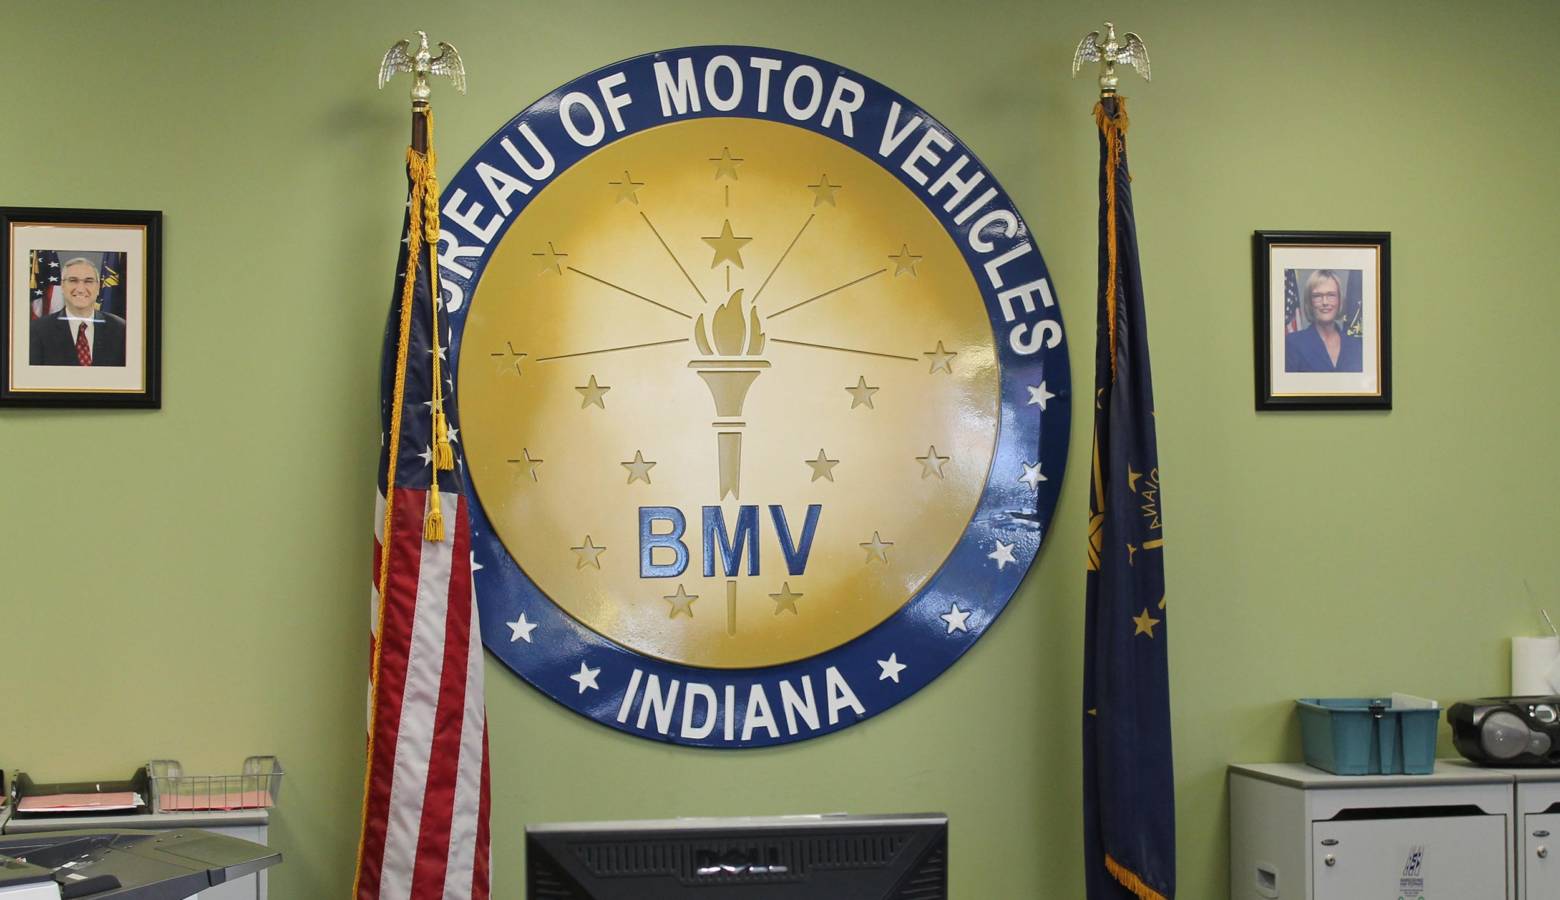 The BMV has long allowed people to change the gender on their license. But that policy came under scrutiny in 2019 and prompted the agency to establish a formal procedure. (Lauren Chapman/IPB News)